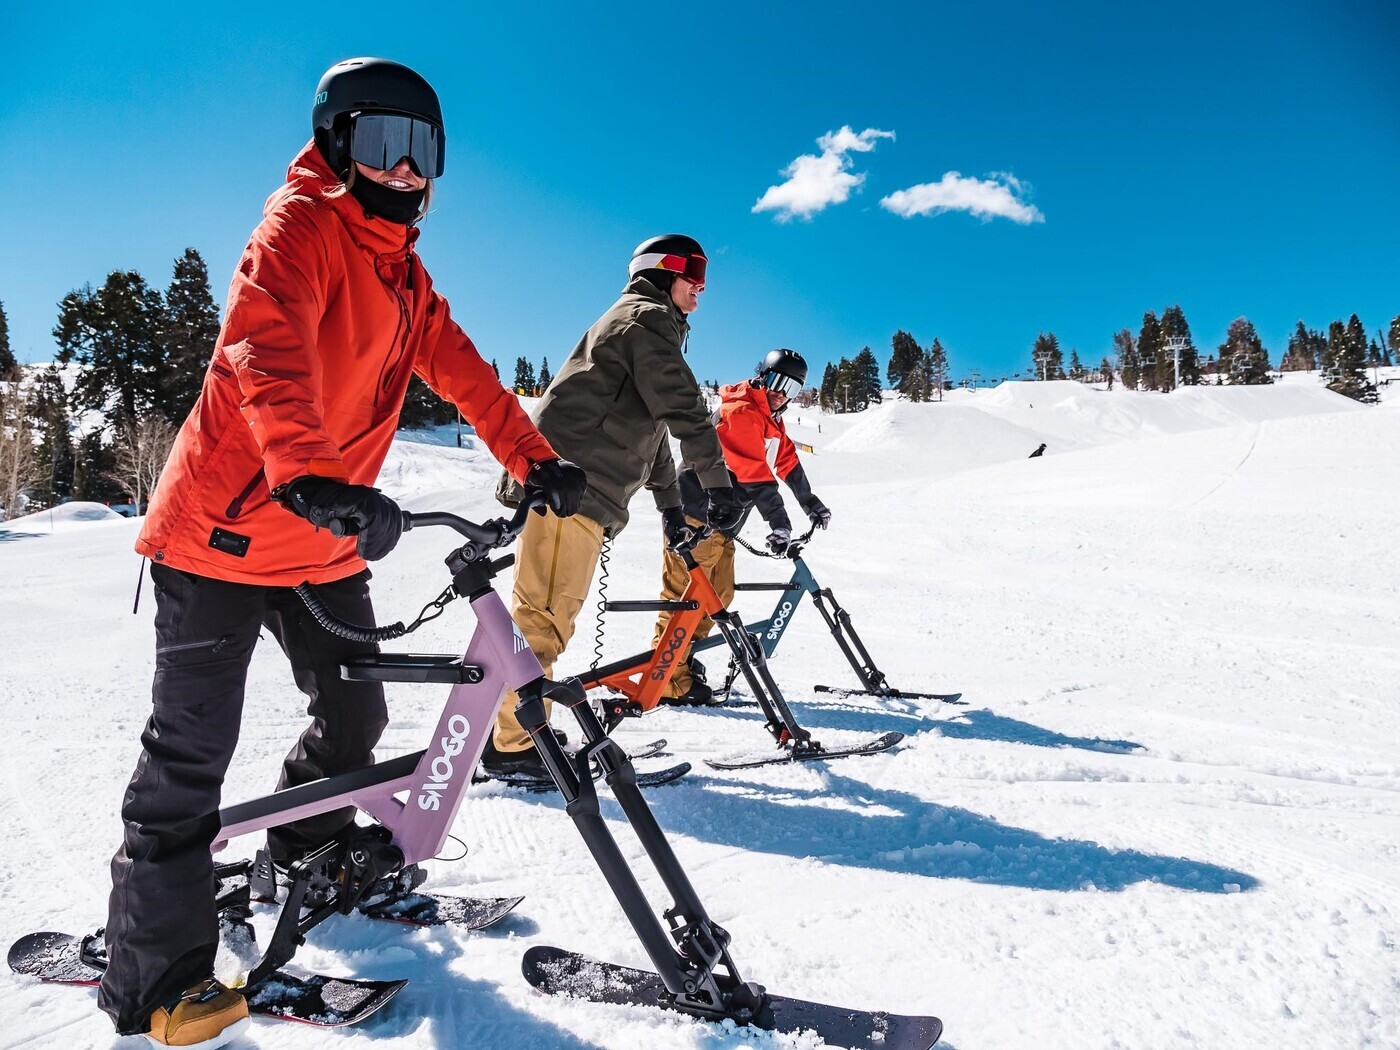 Sno-Go carving snow bike brings on the carbon to shed 12 pounds